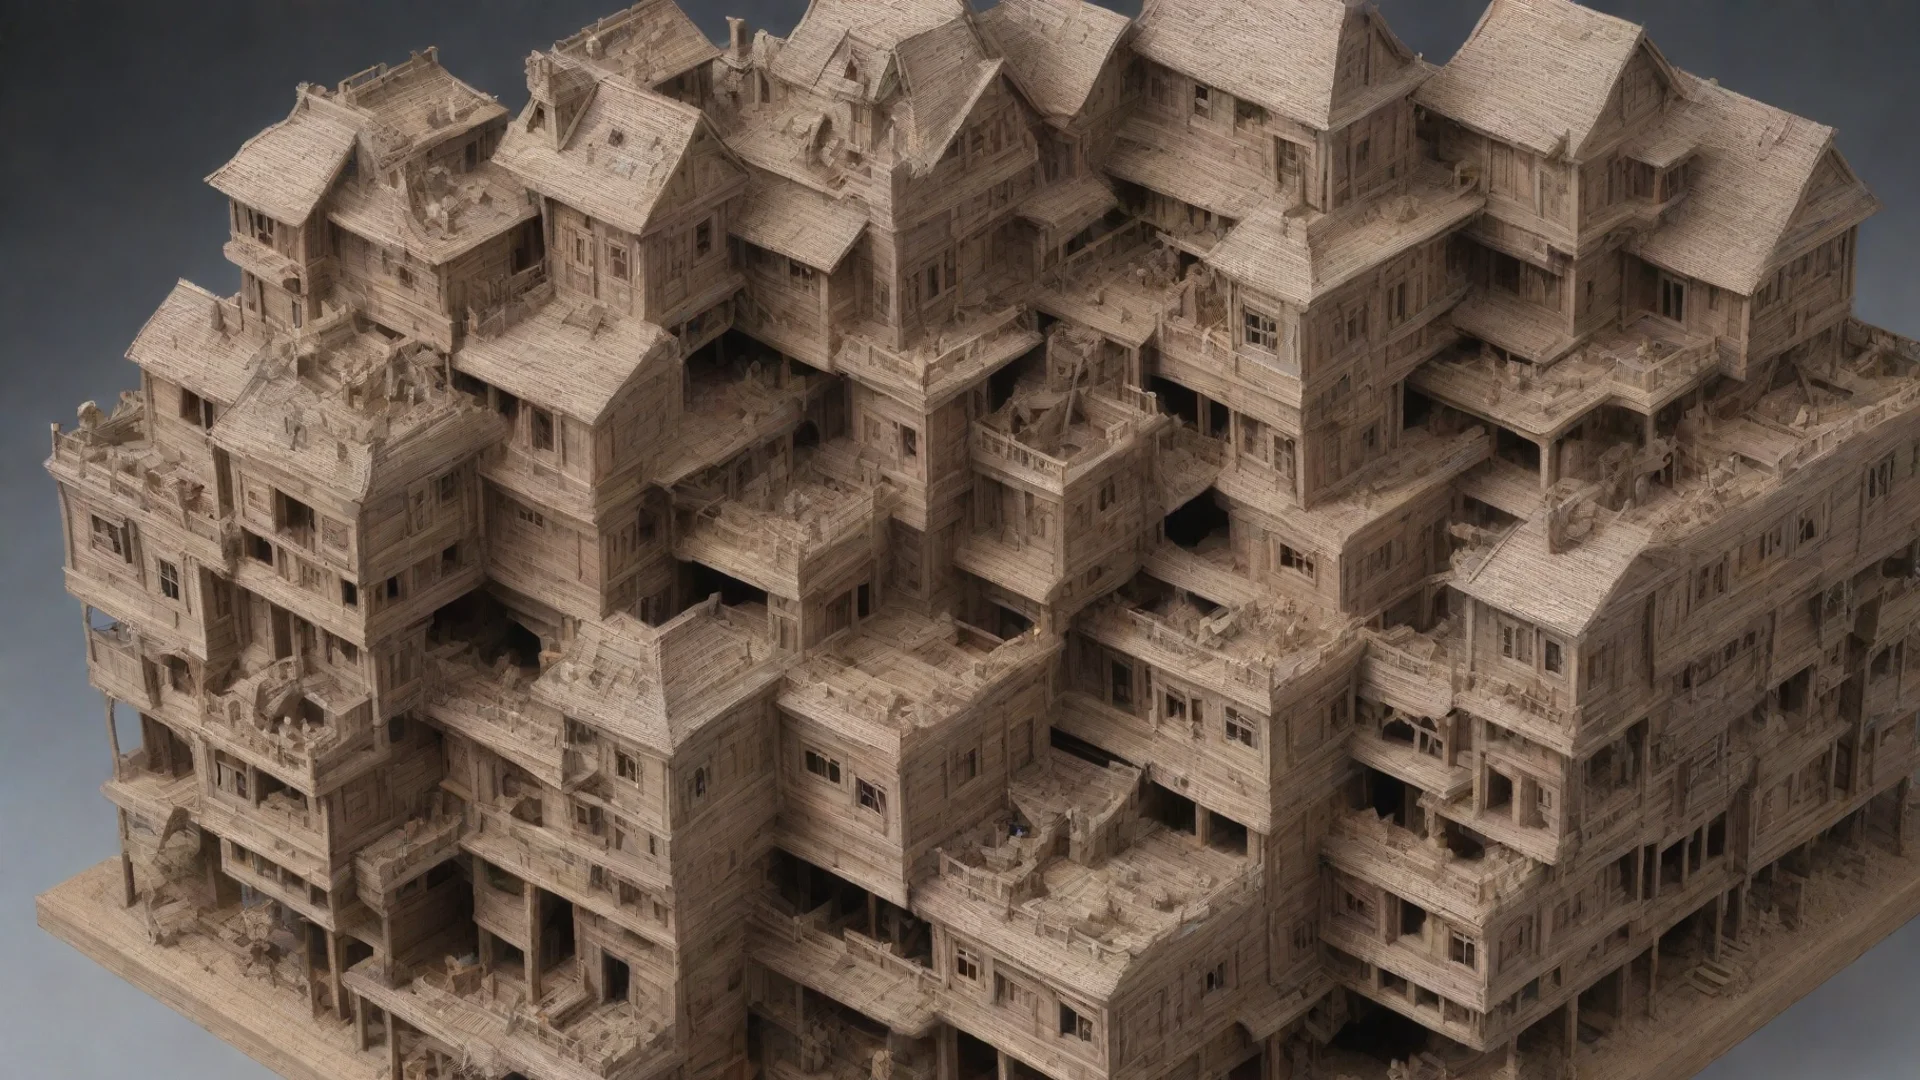 amazing a swarm of parts intertwined upside down escher paradox kitbash greeble timber construction building in a building socia awesome portrait 2 wide